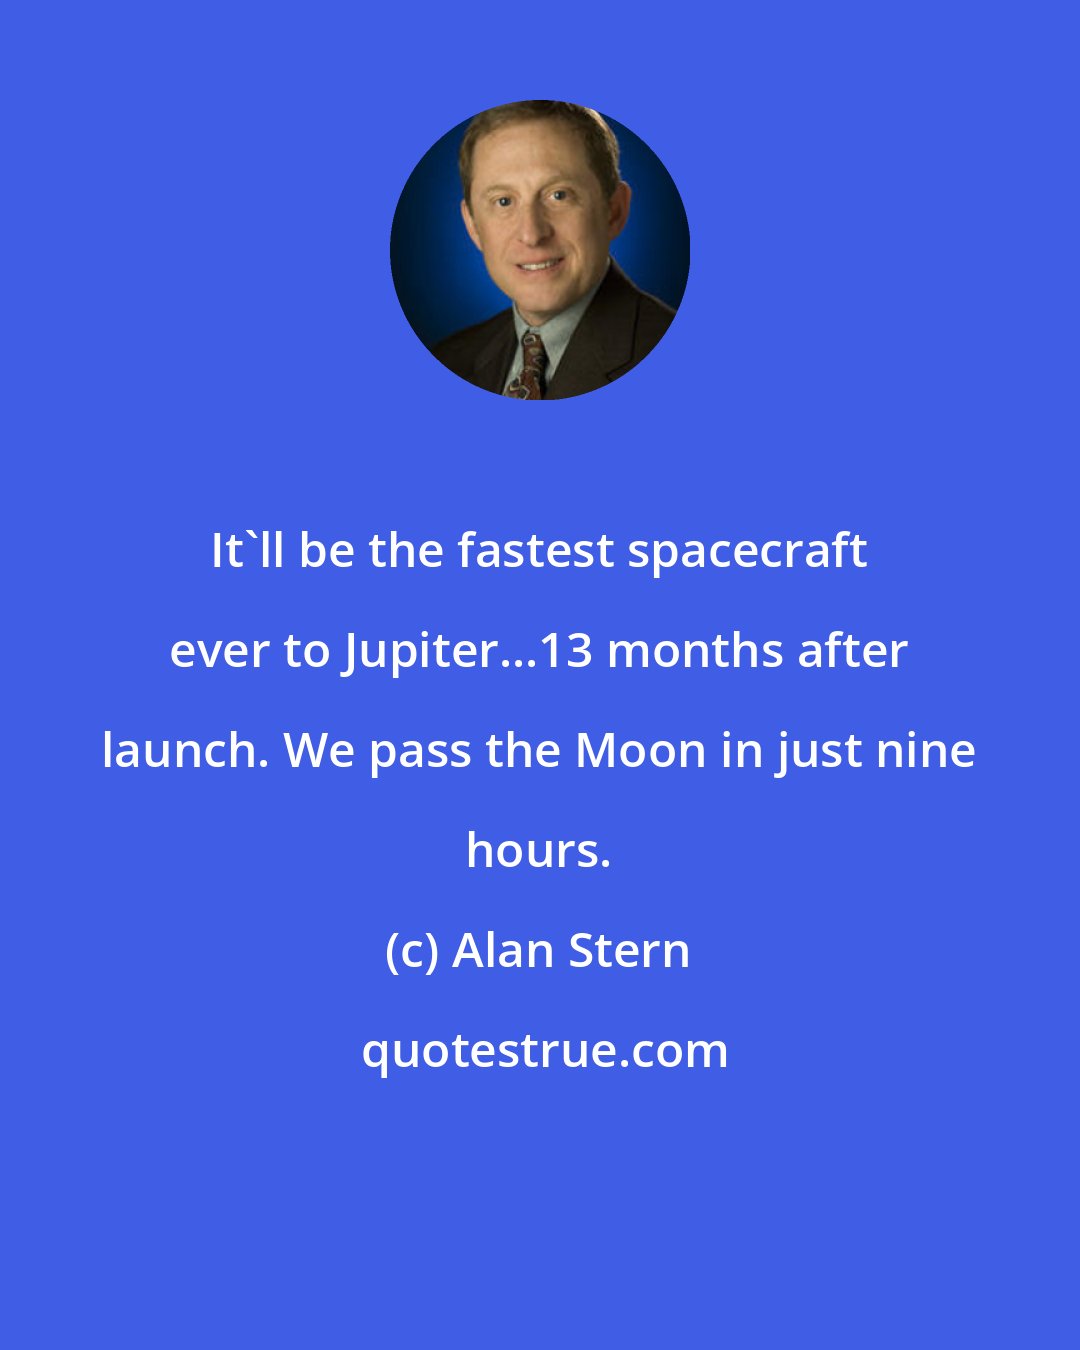 Alan Stern: It'll be the fastest spacecraft ever to Jupiter...13 months after launch. We pass the Moon in just nine hours.